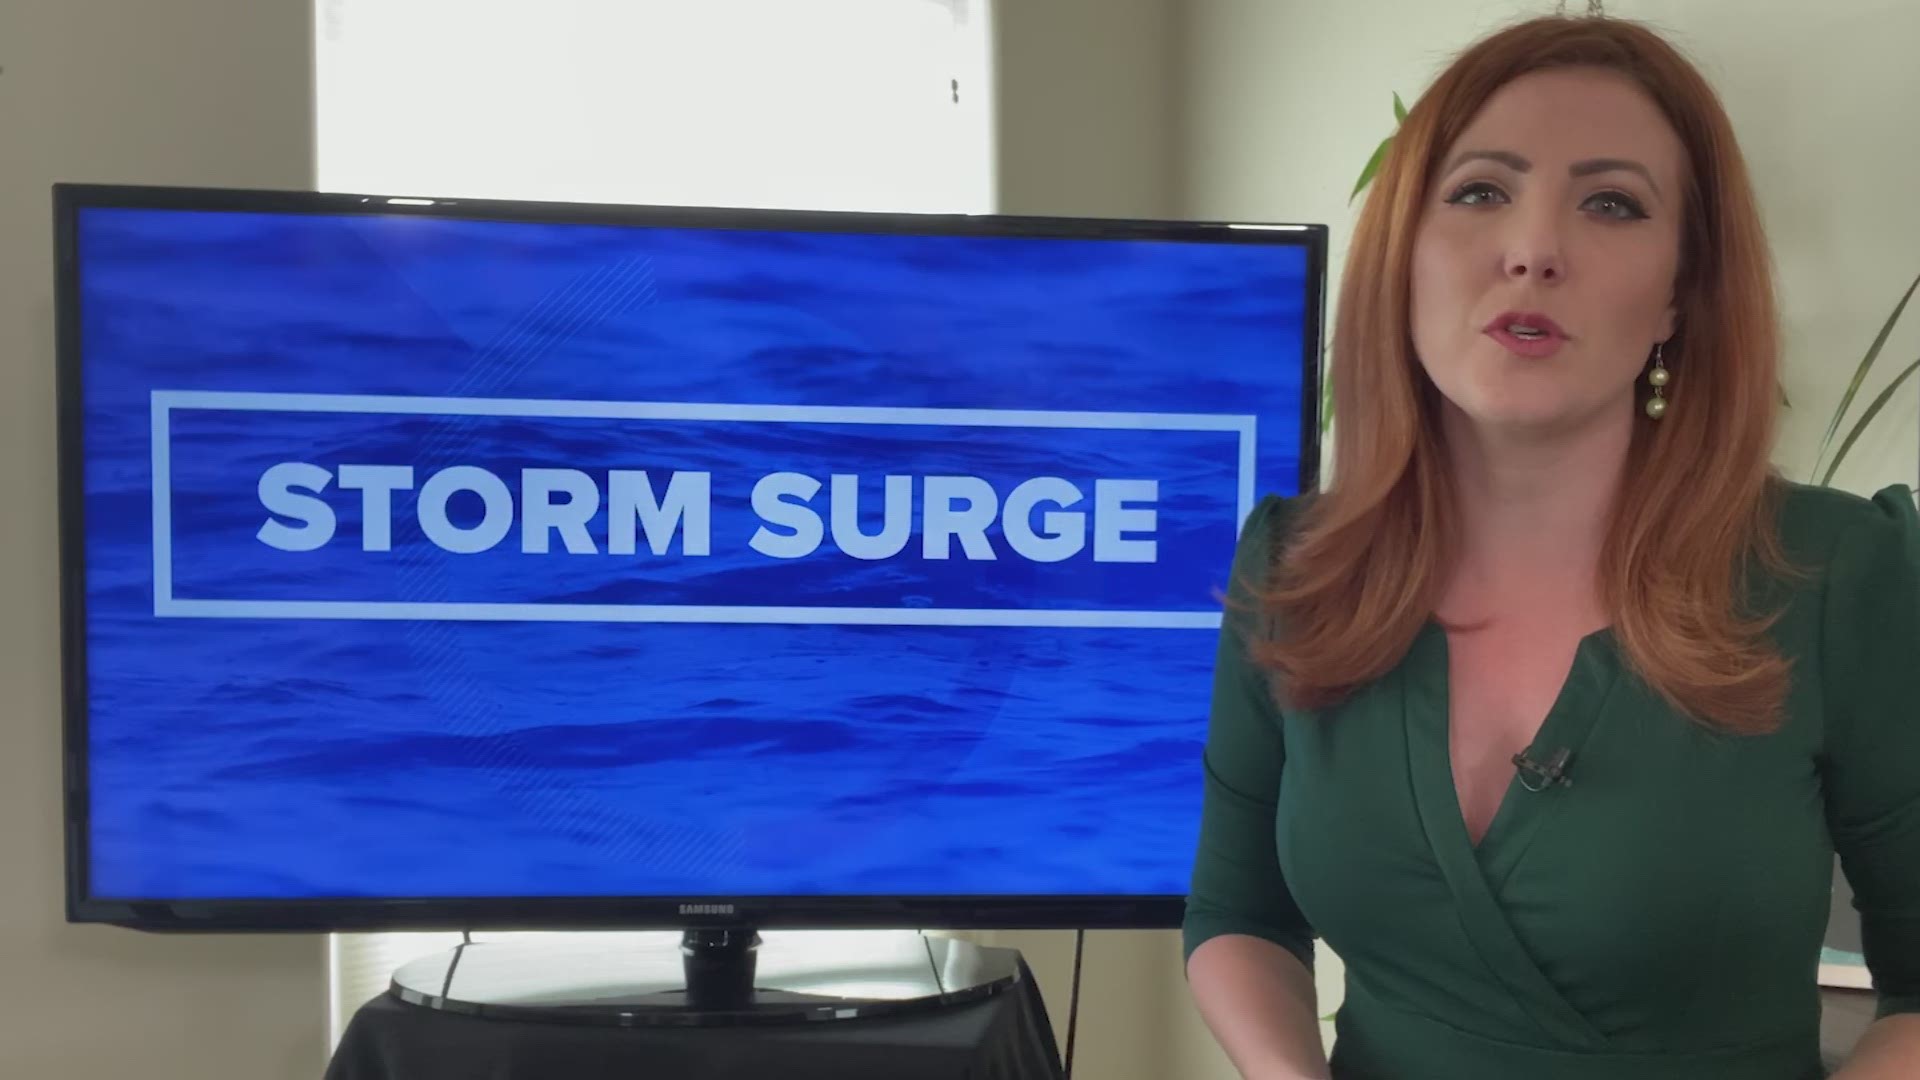 Hurricane Laura could bring with it a deadly storm surge. Here's an explanation of what that means.